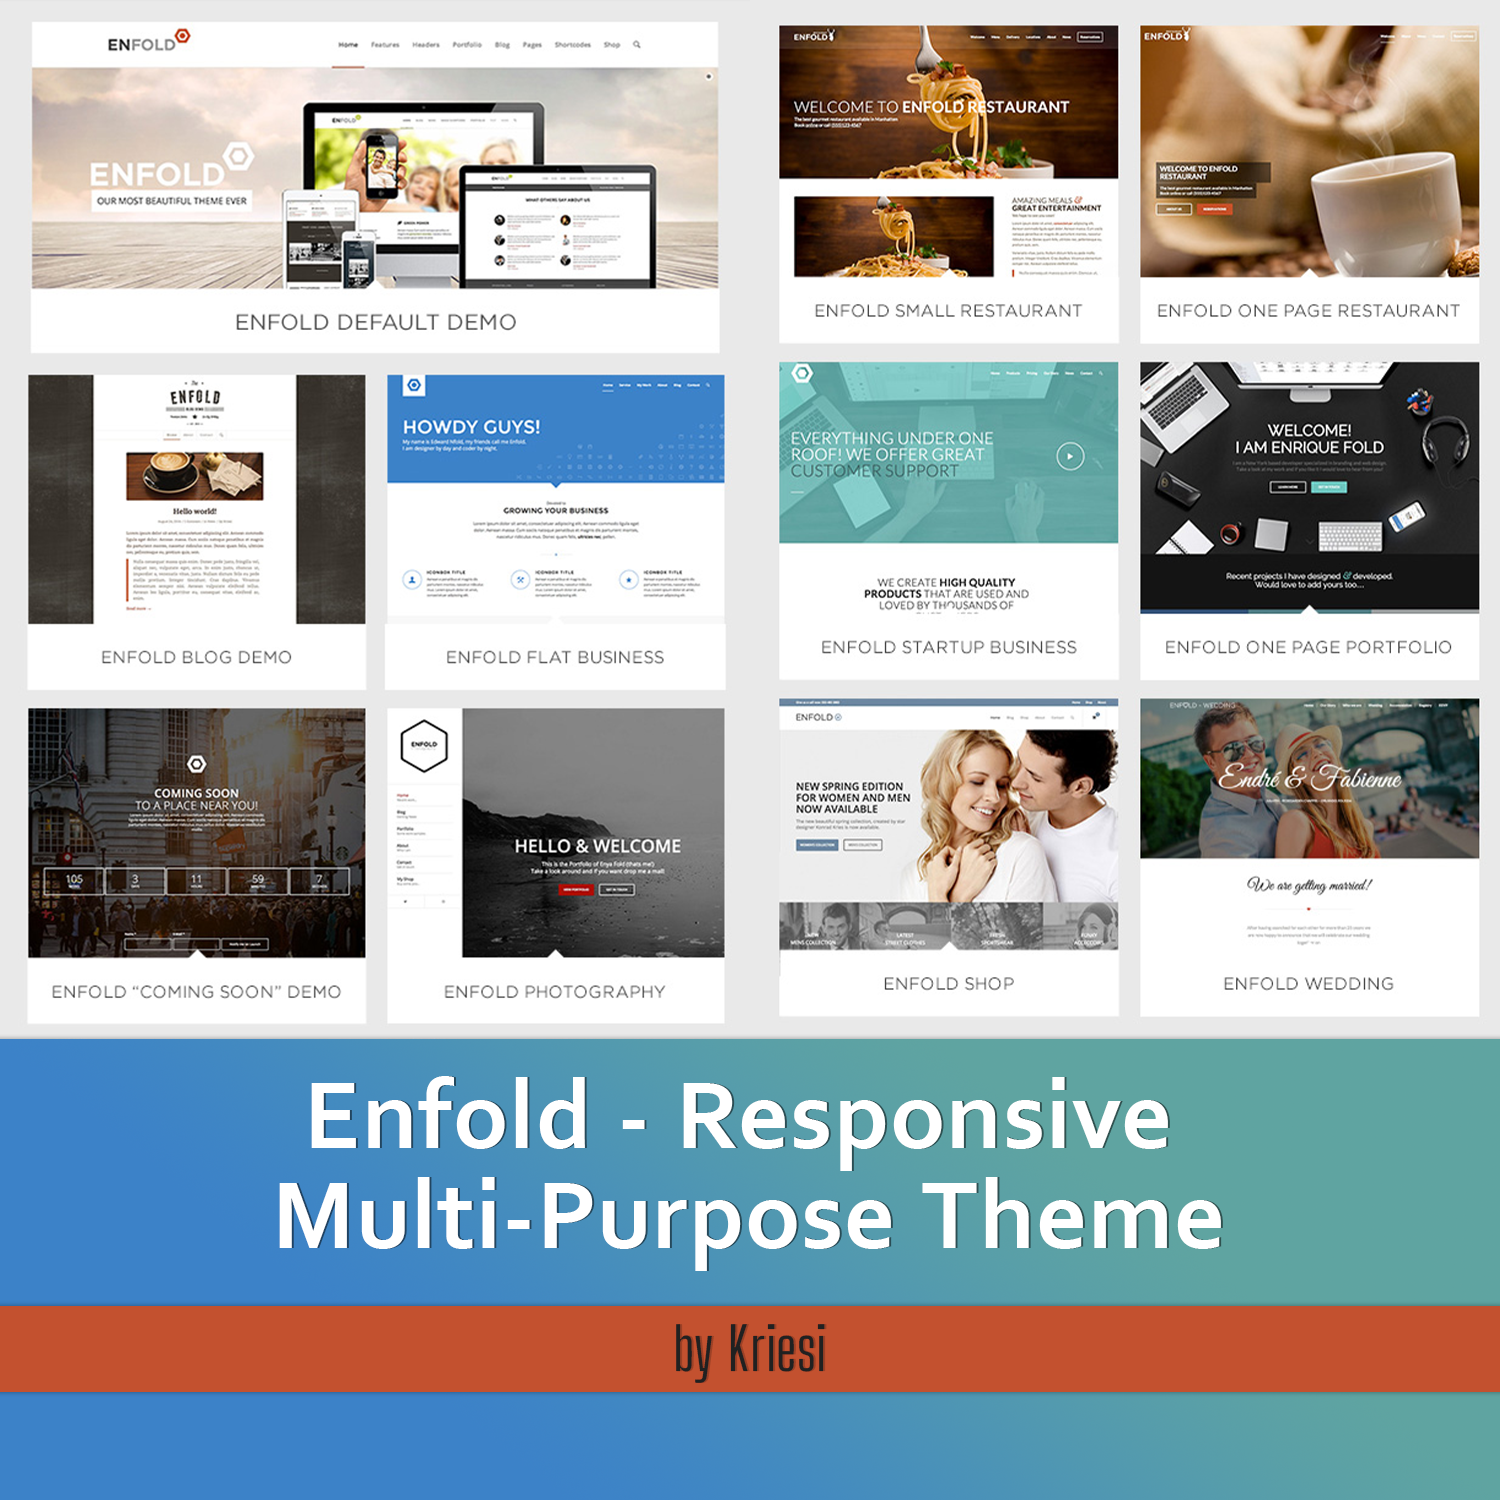 Images with enfold responsive multi purpose theme.